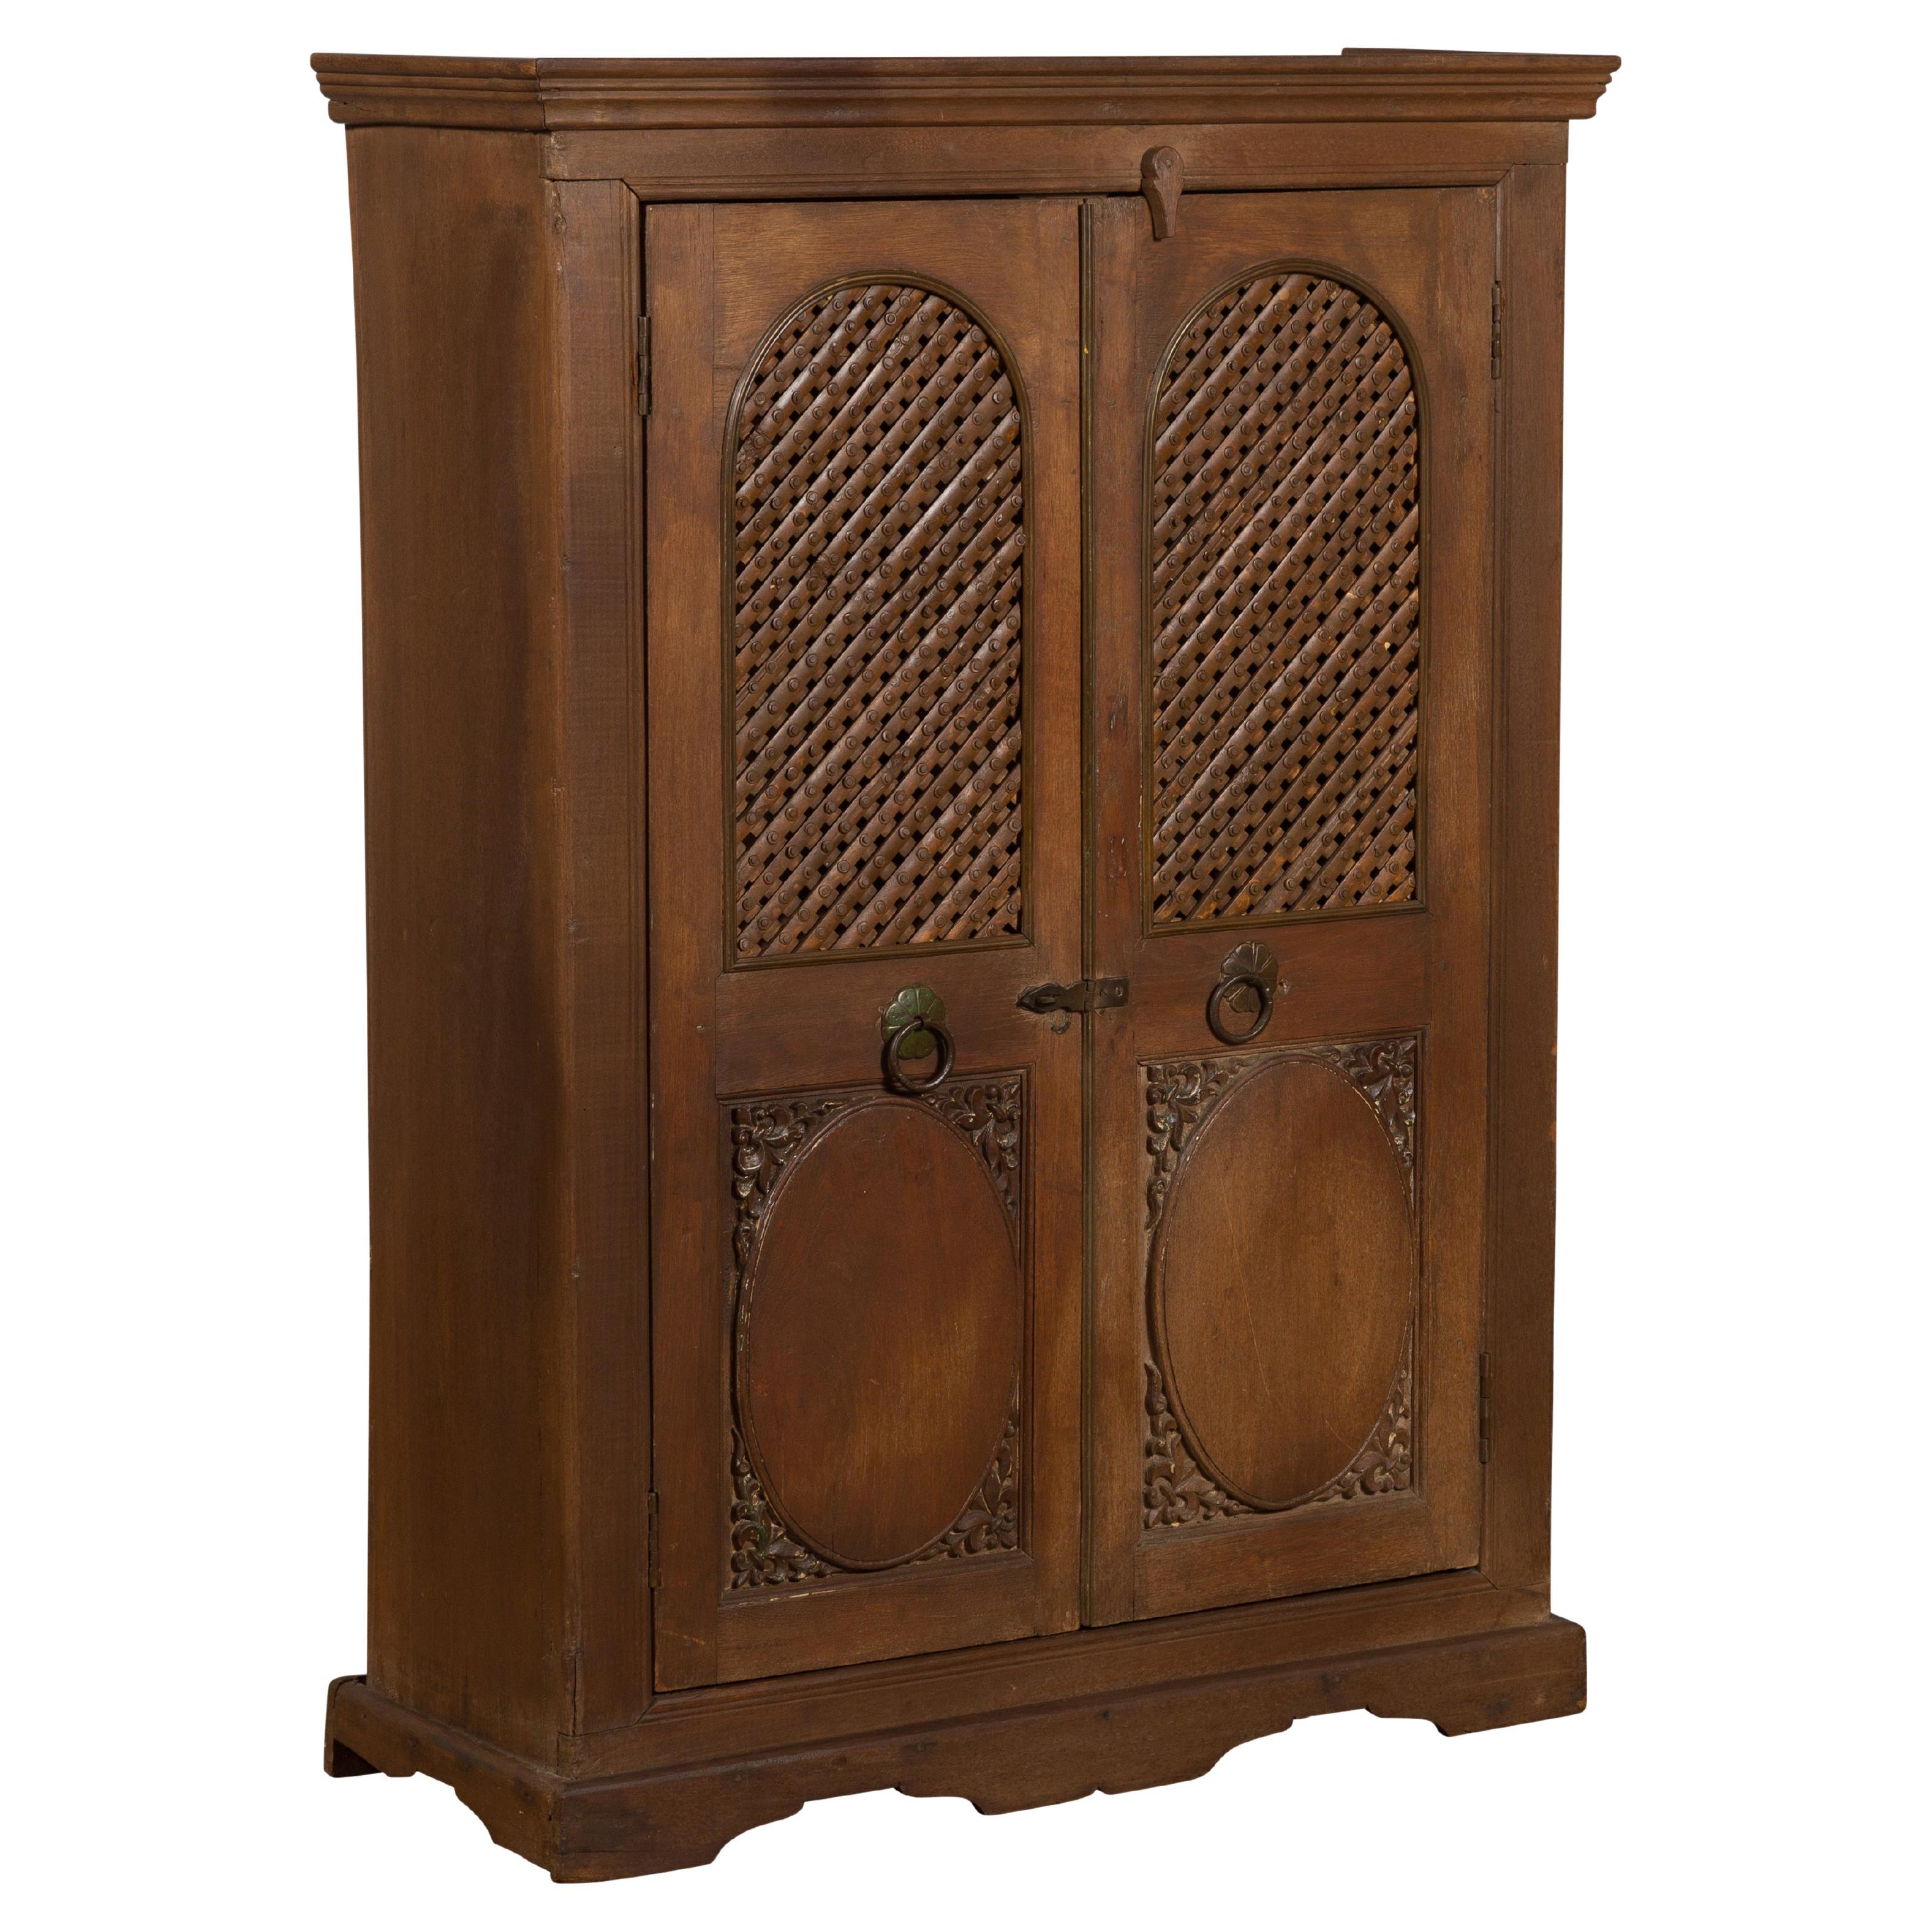 Indian Vintage Wooden Cabinet with Lattice Motifs and Carved Panels For Sale